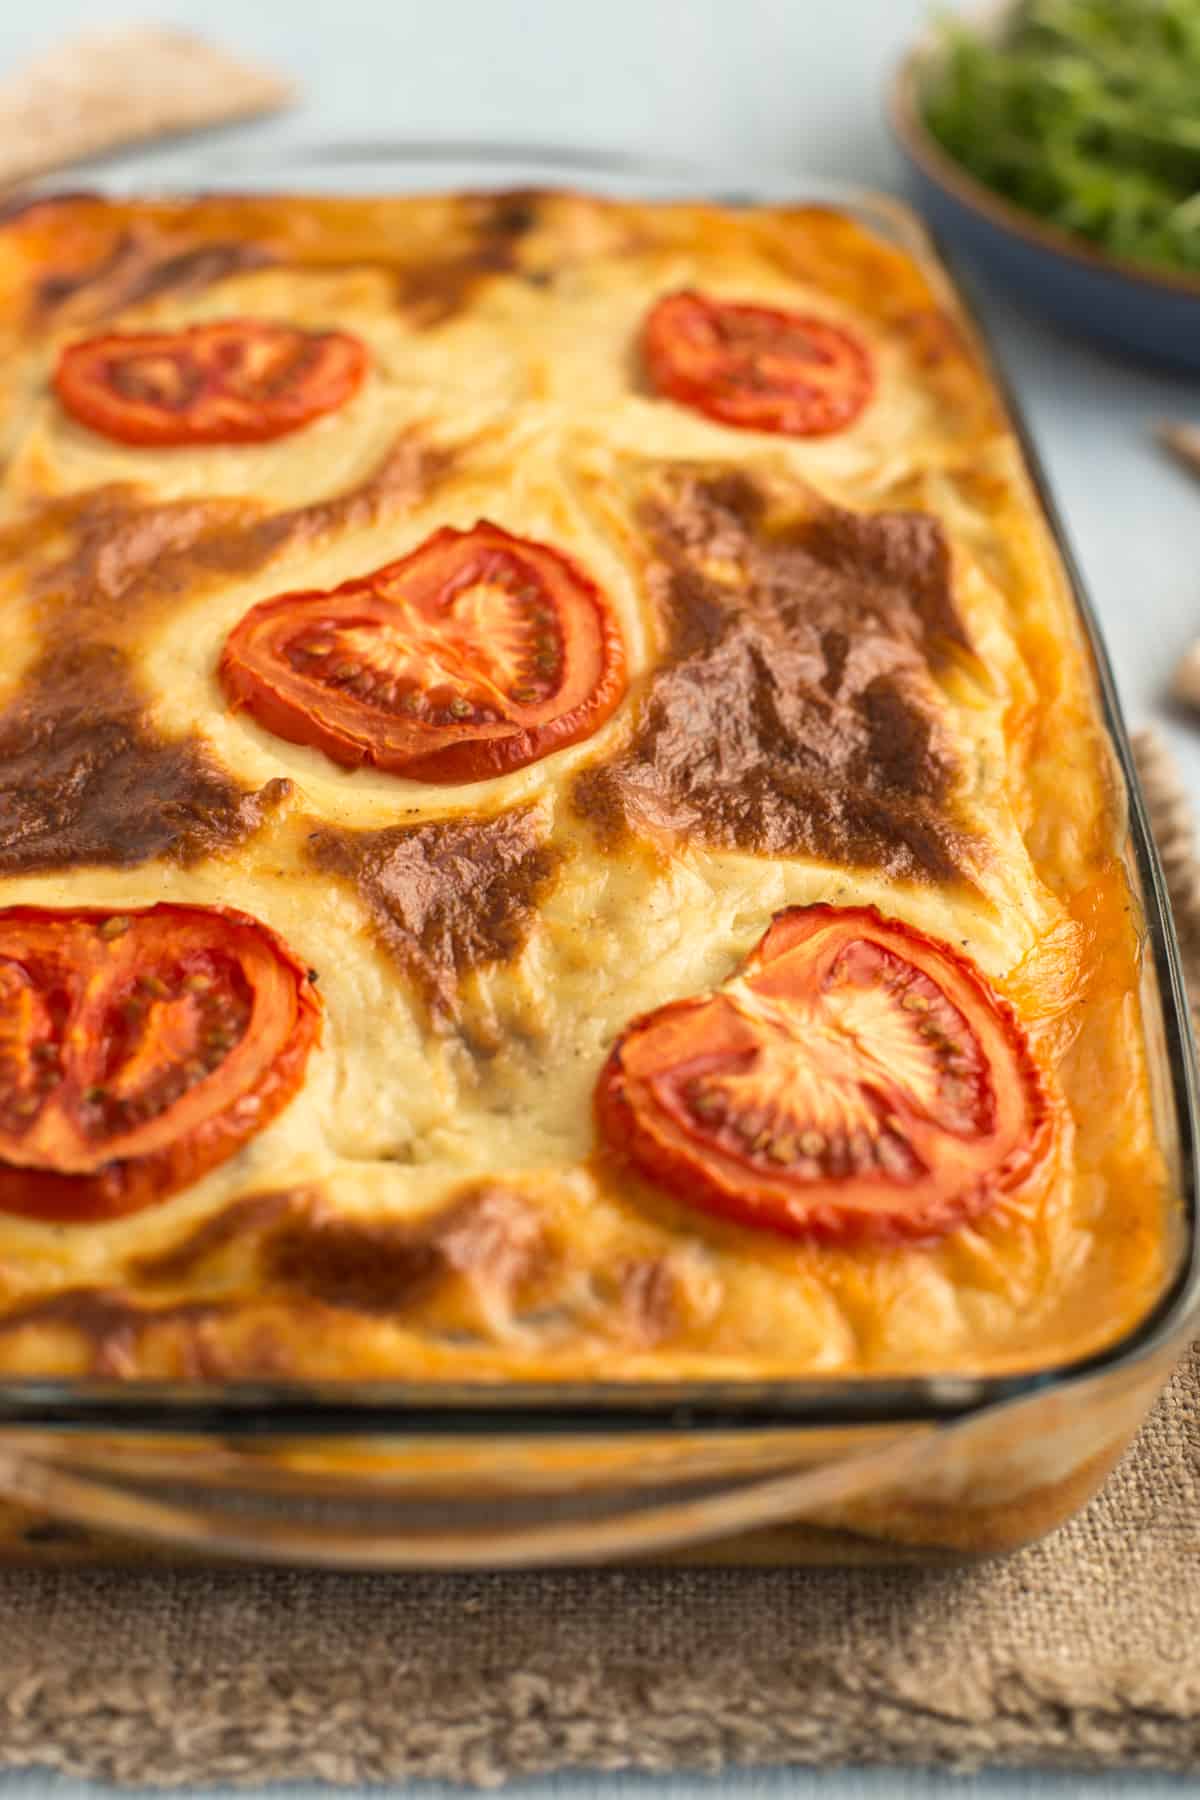 A baked vegetarian moussaka in a baking dish, topped with sliced tomatoes.